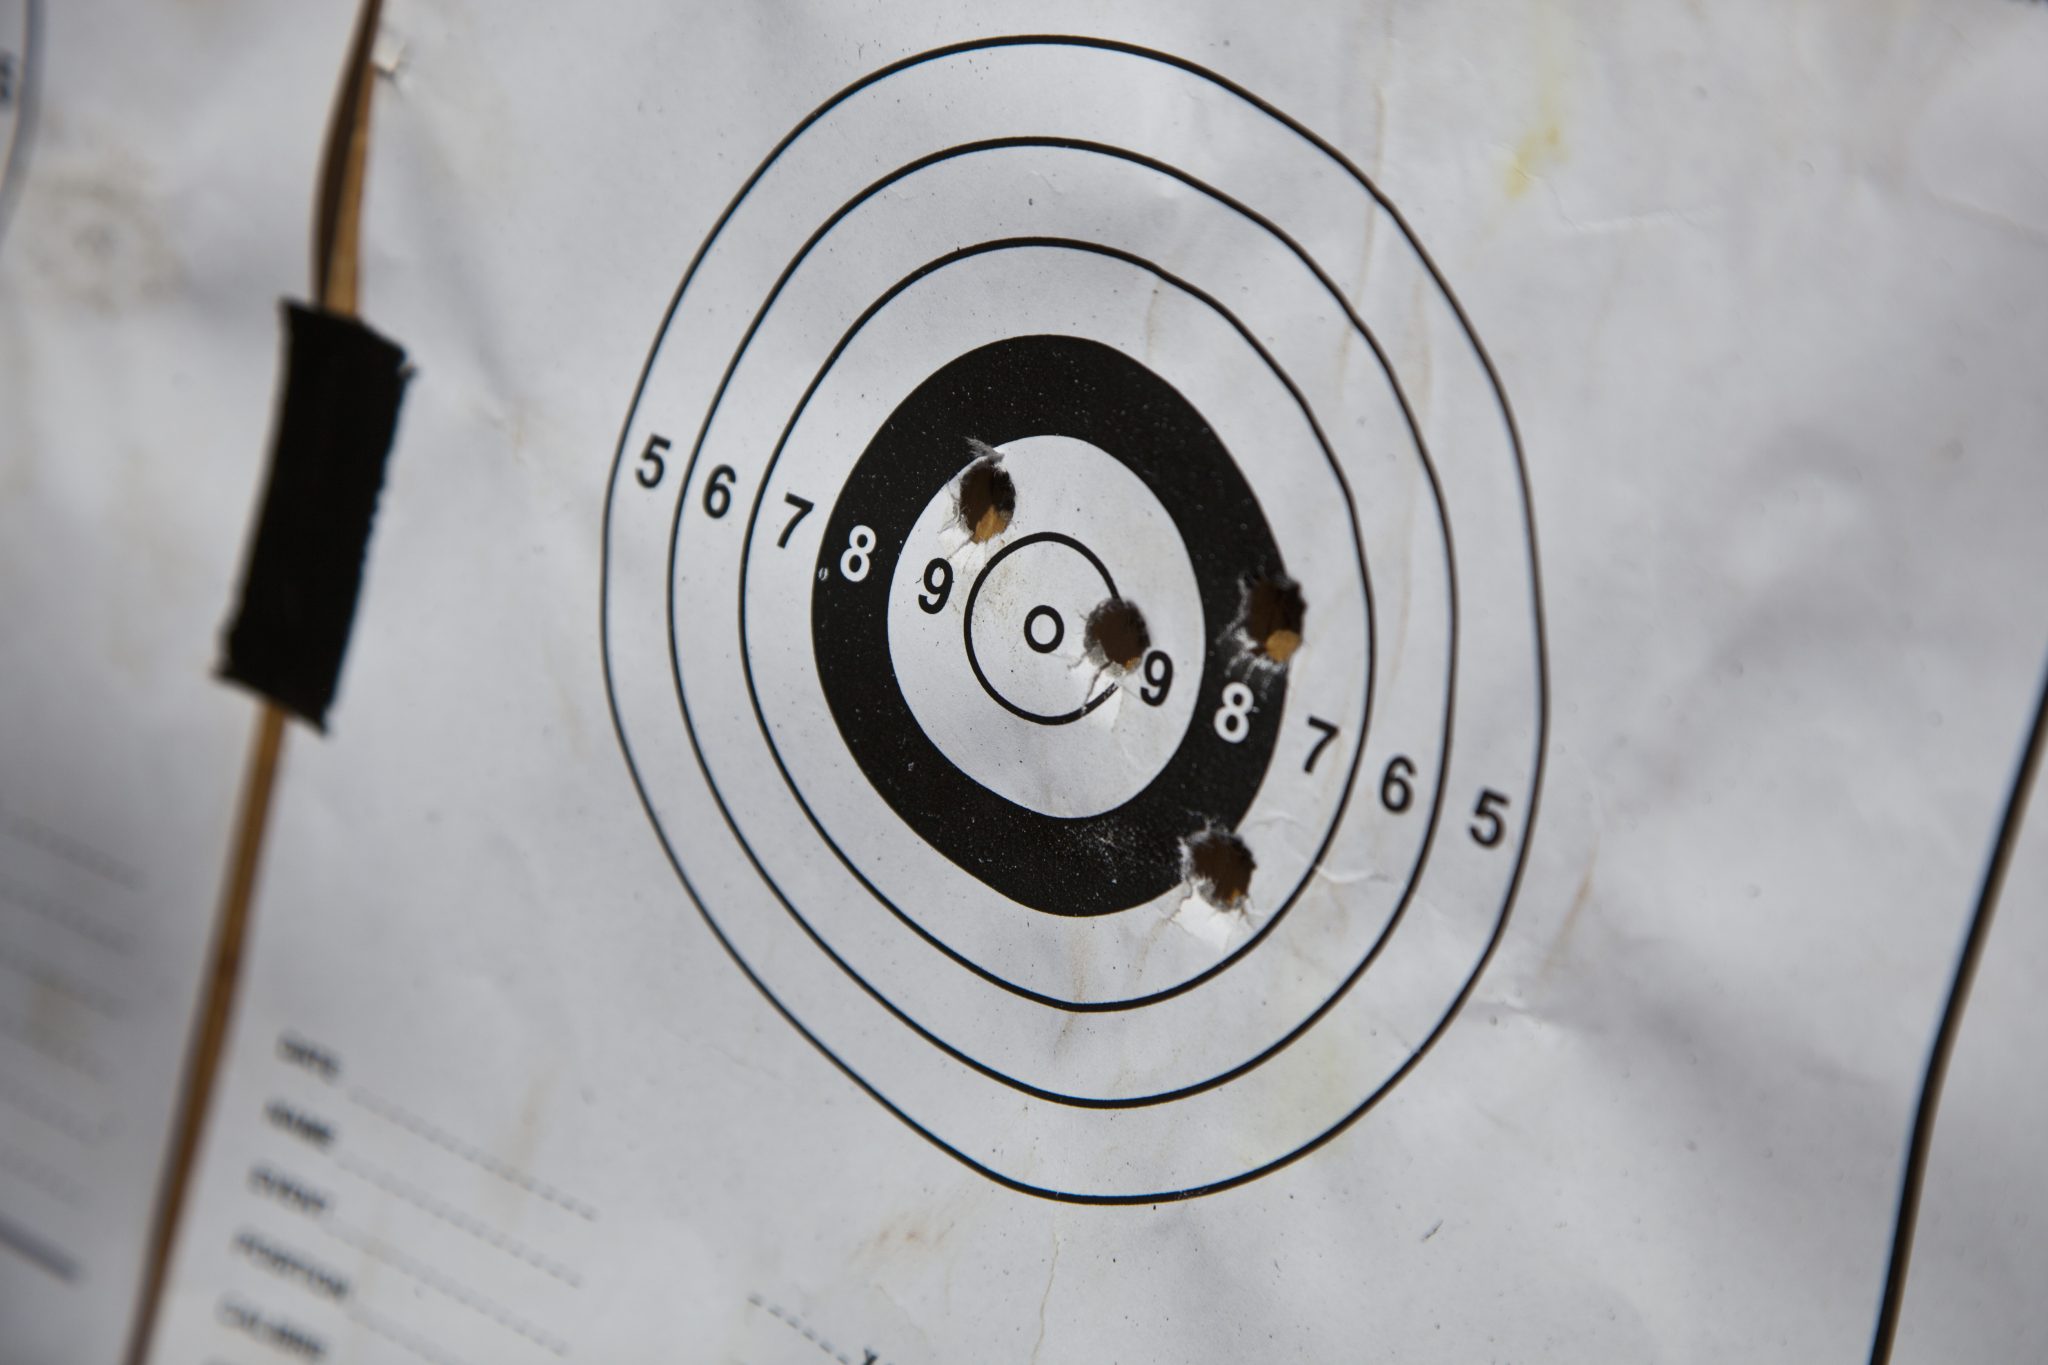 Bullet holes on a paper target